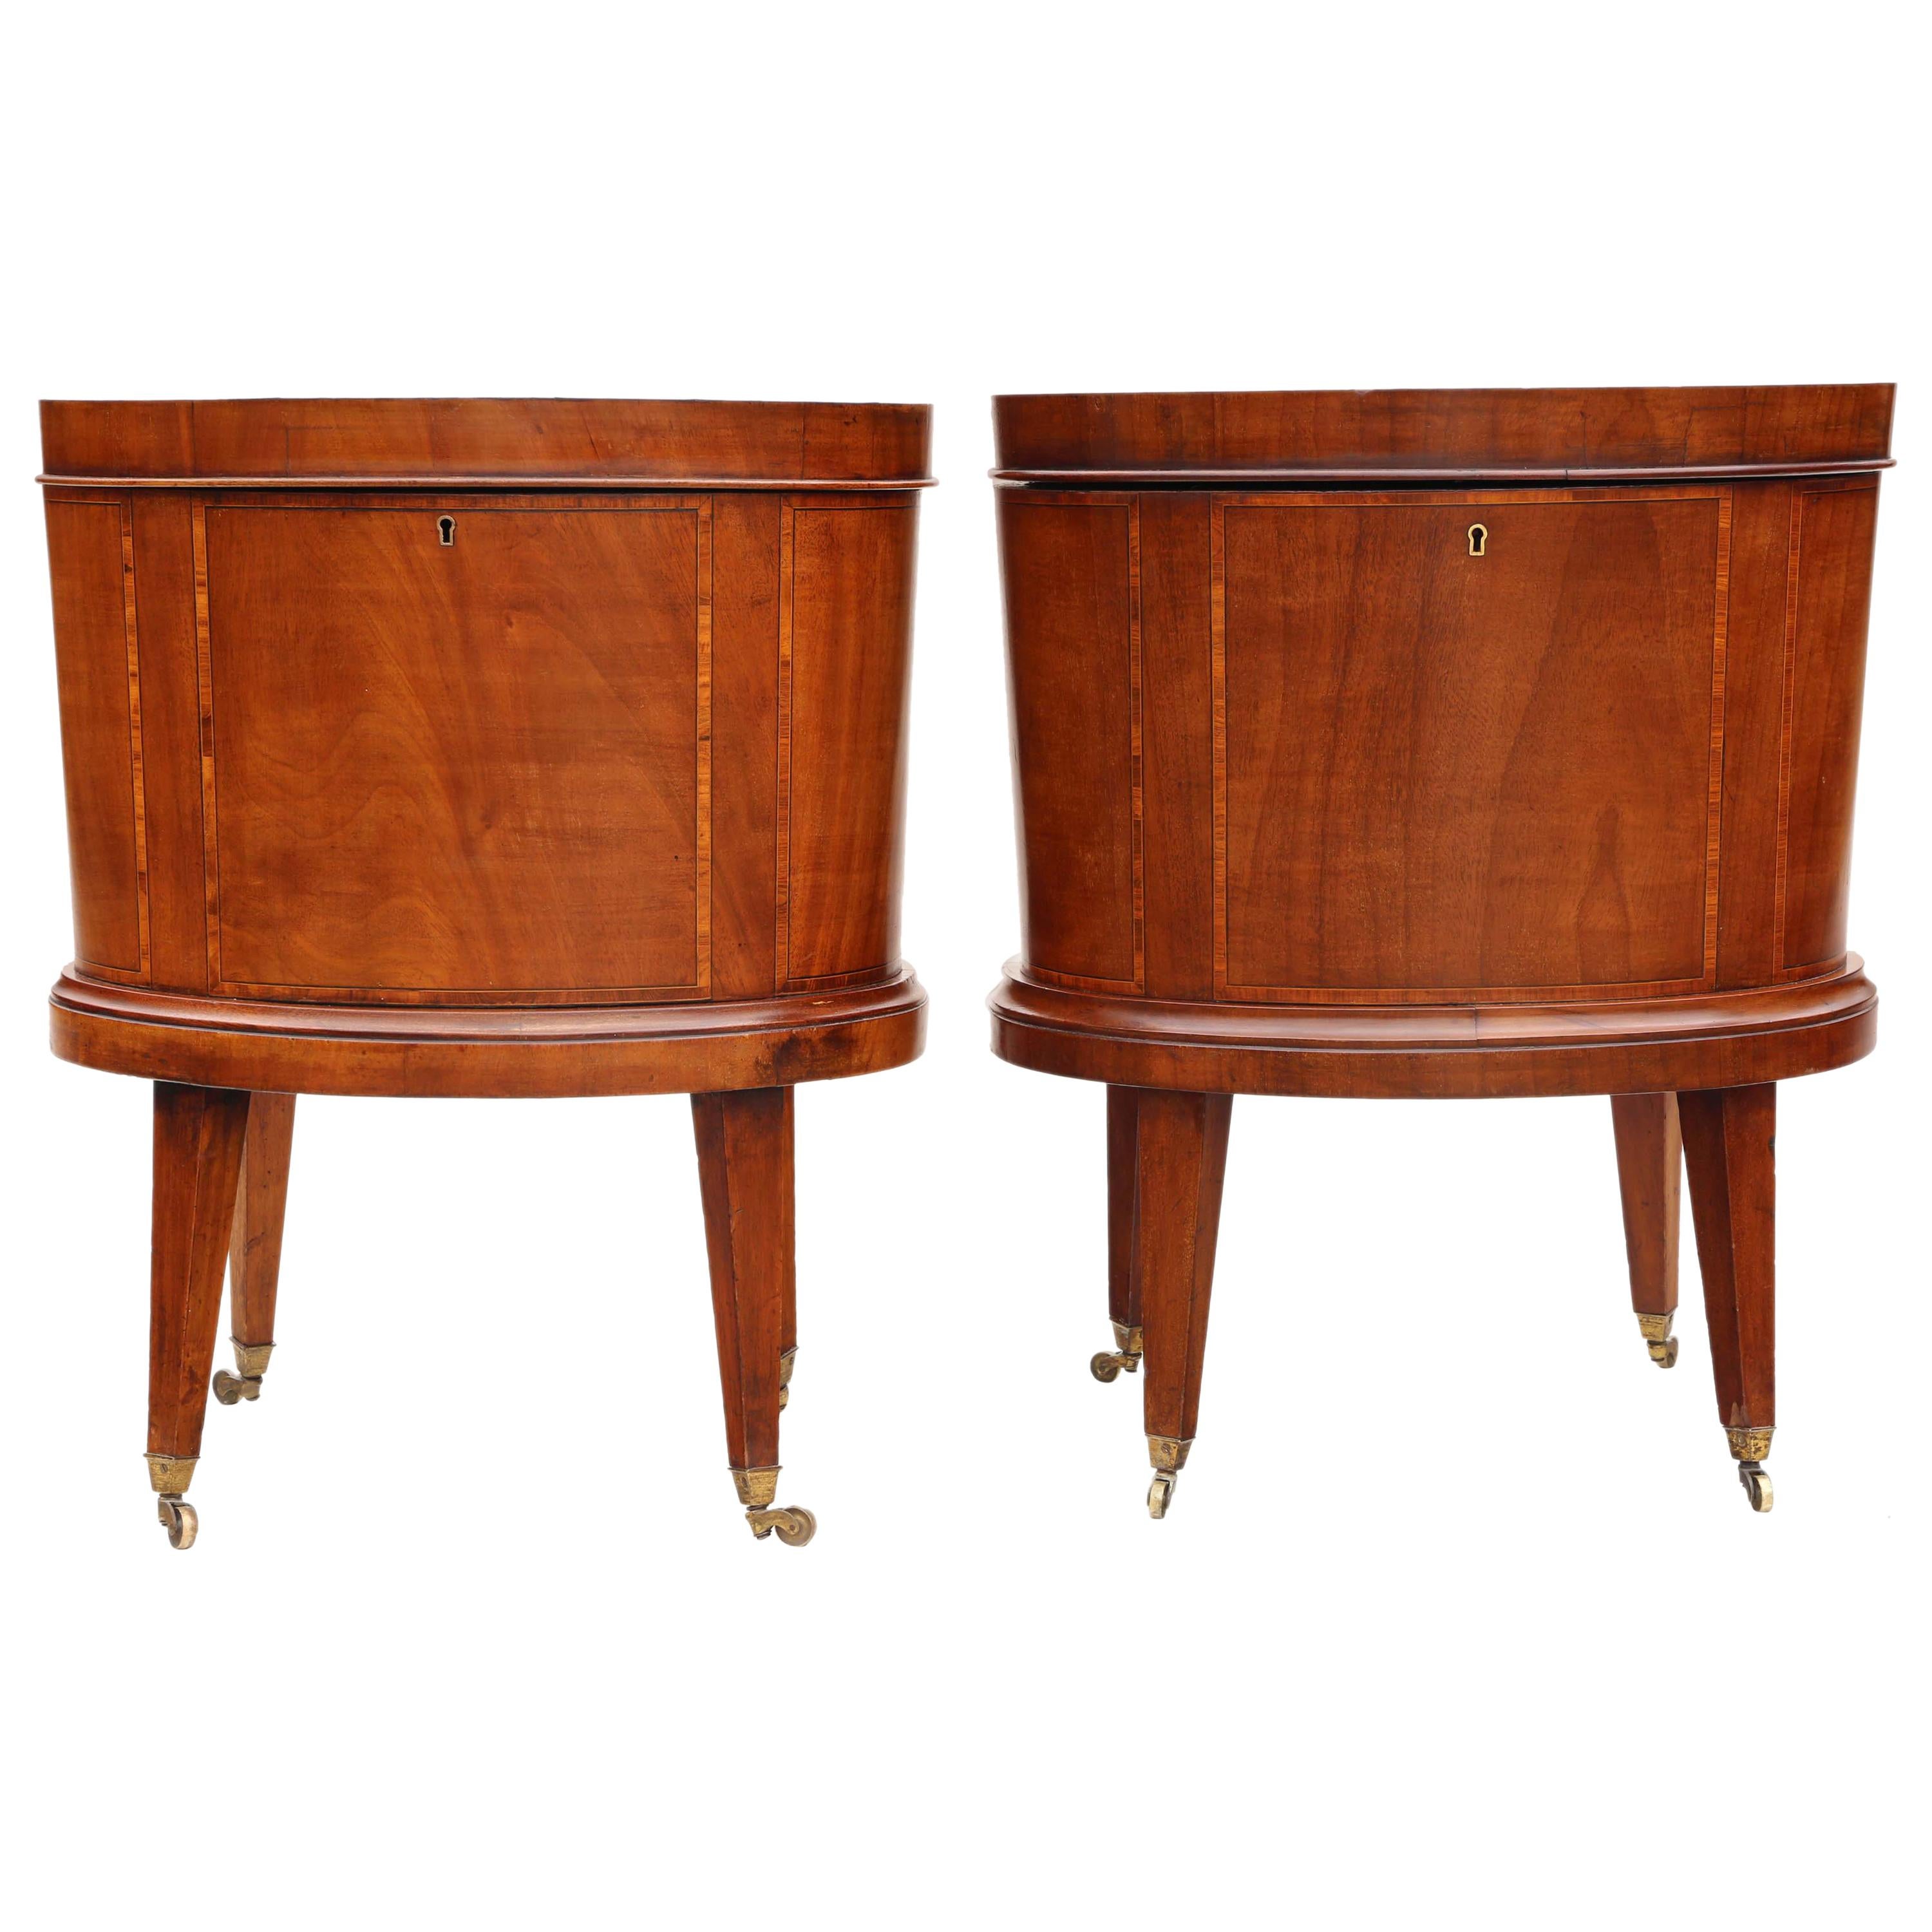 Antique Georgian Revival Pair of Inlaid Mahogany Cellarettes Cupboards Cabinets For Sale